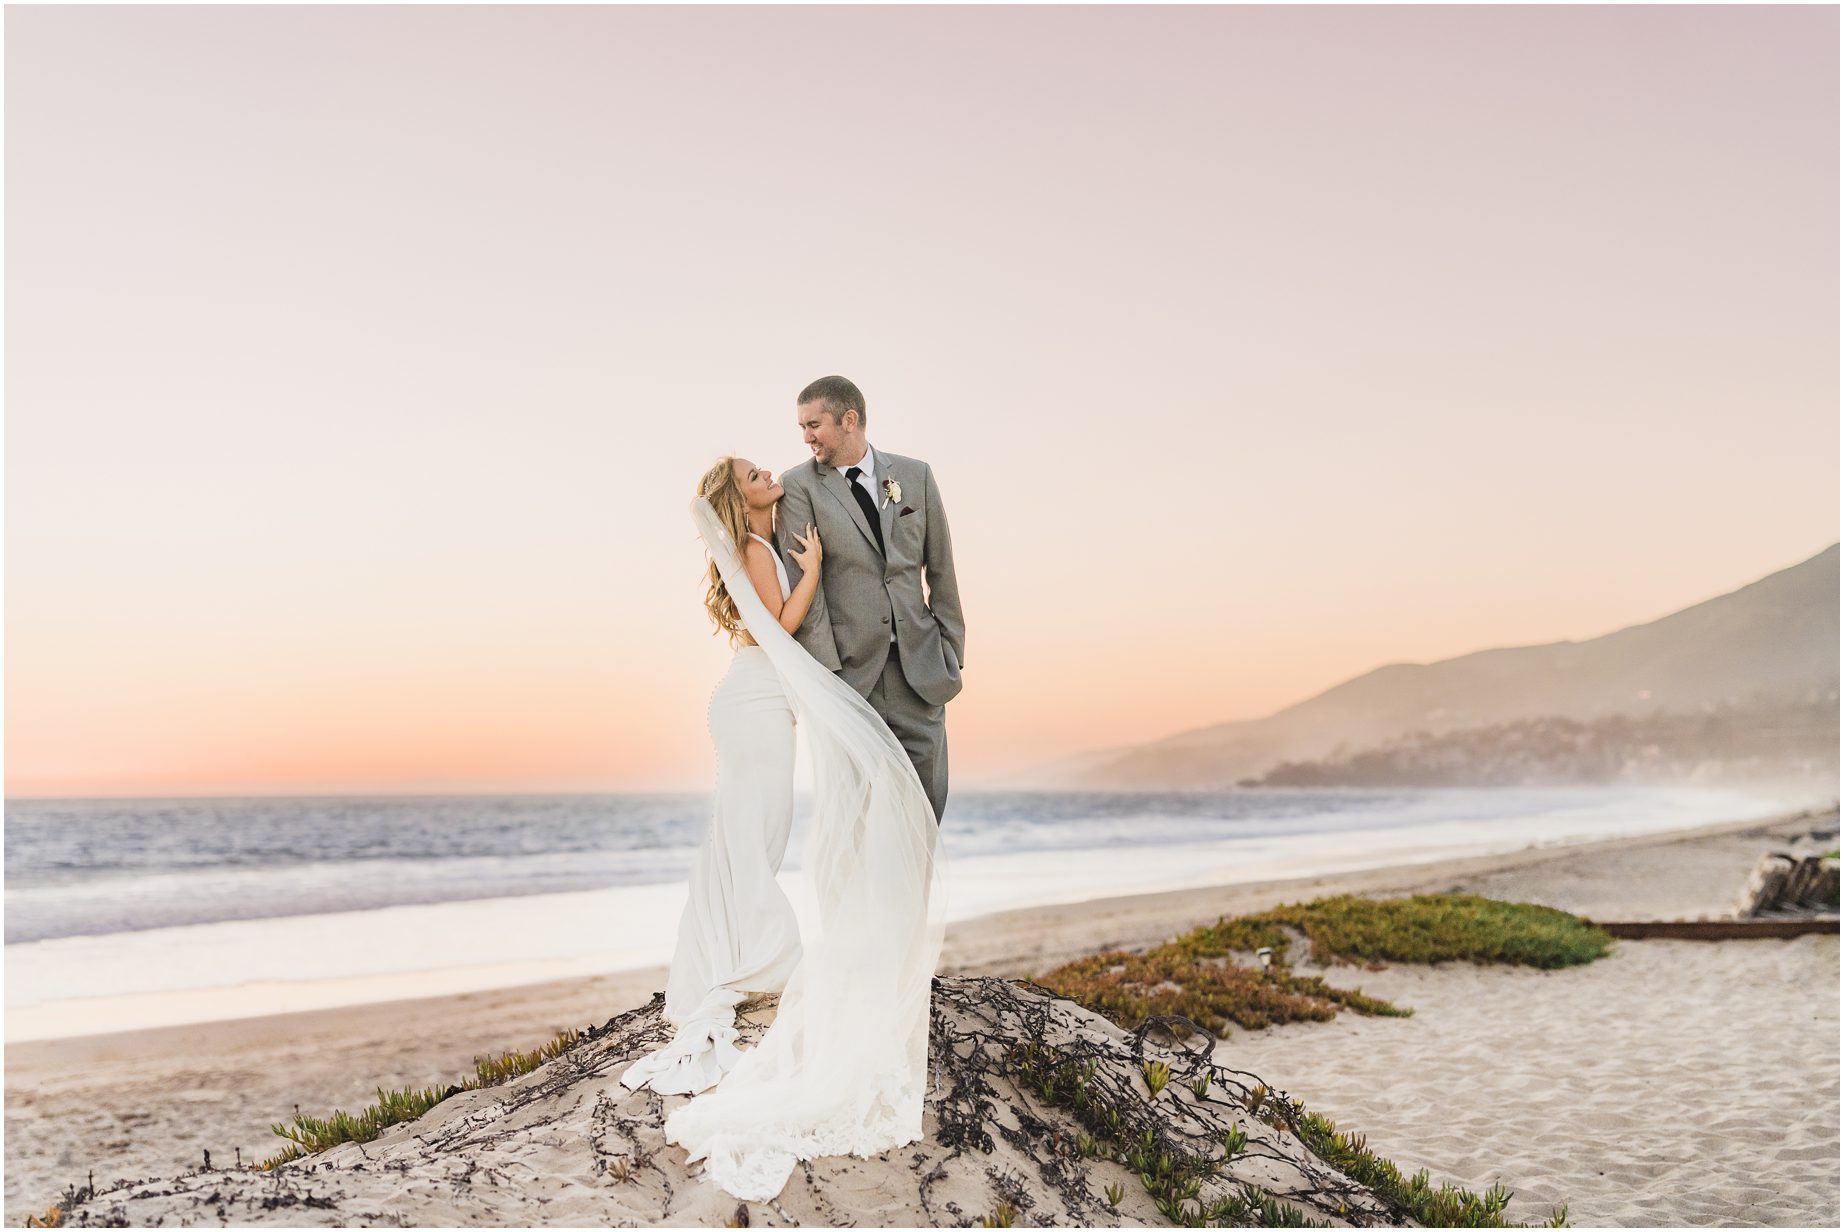 A bride in an Enzoani wedding dress holds her groom on the Malibu Beach at sunset